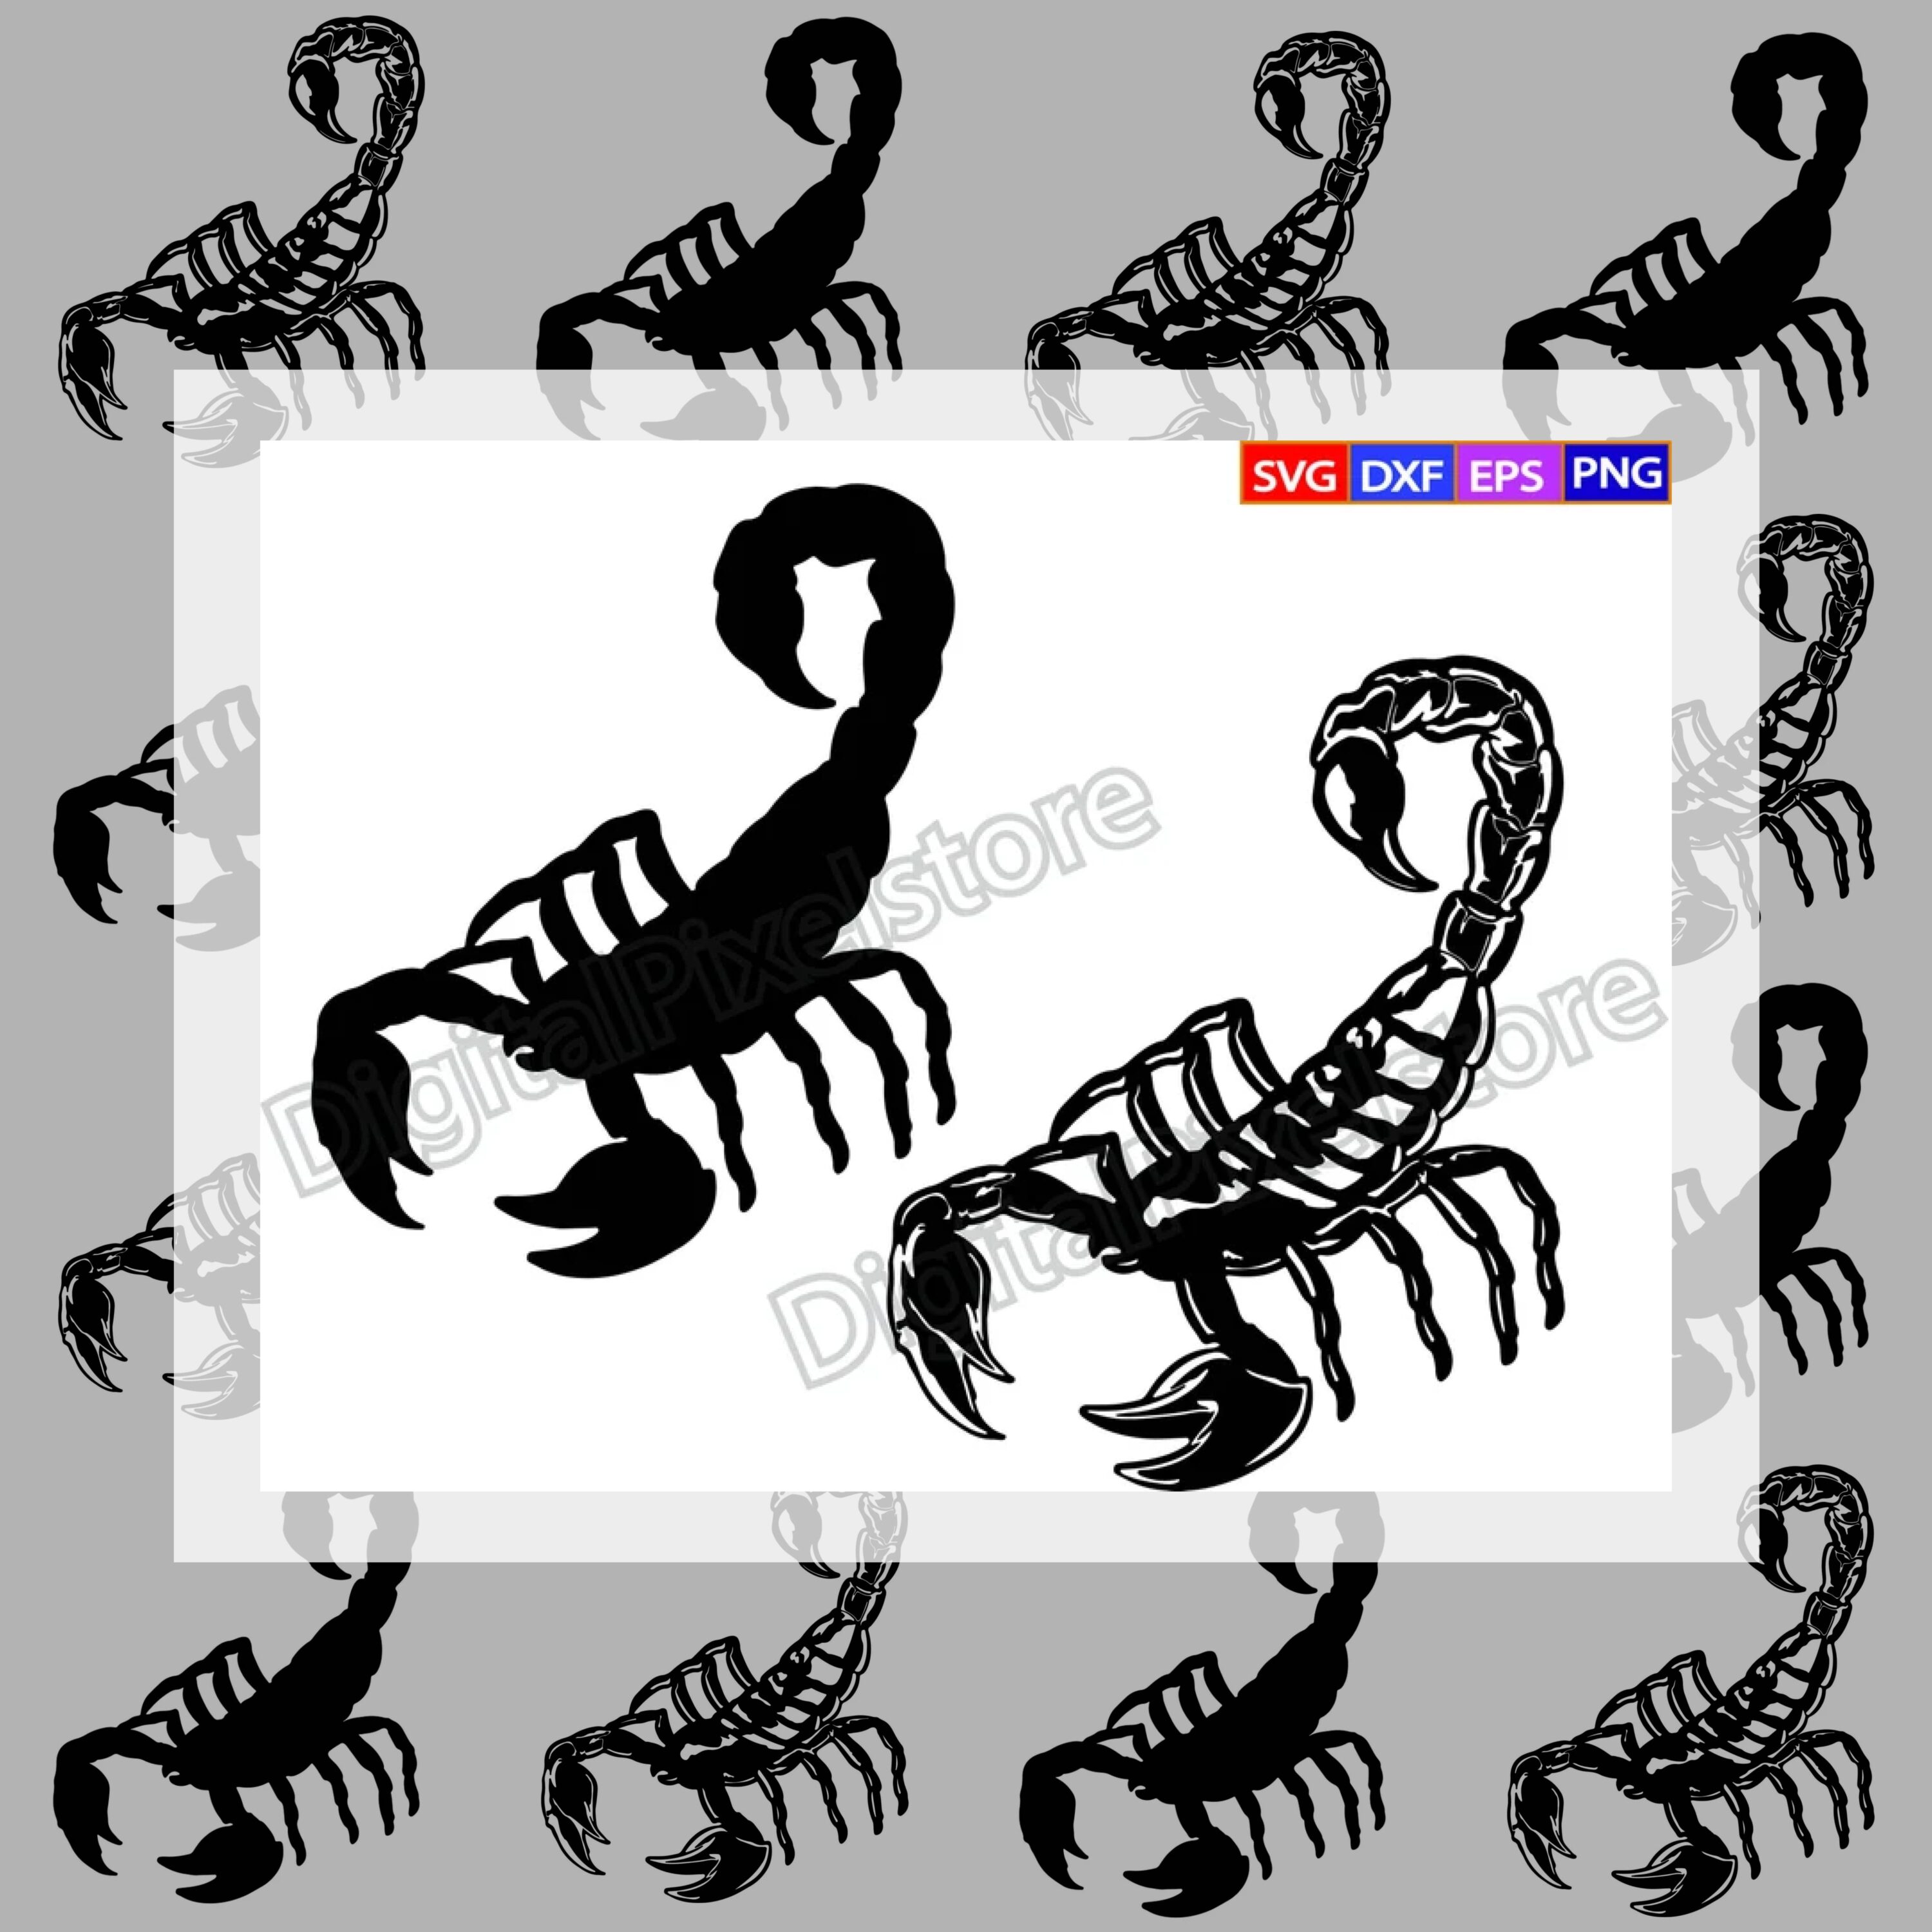 Drawing of a scorpion and its shadow.